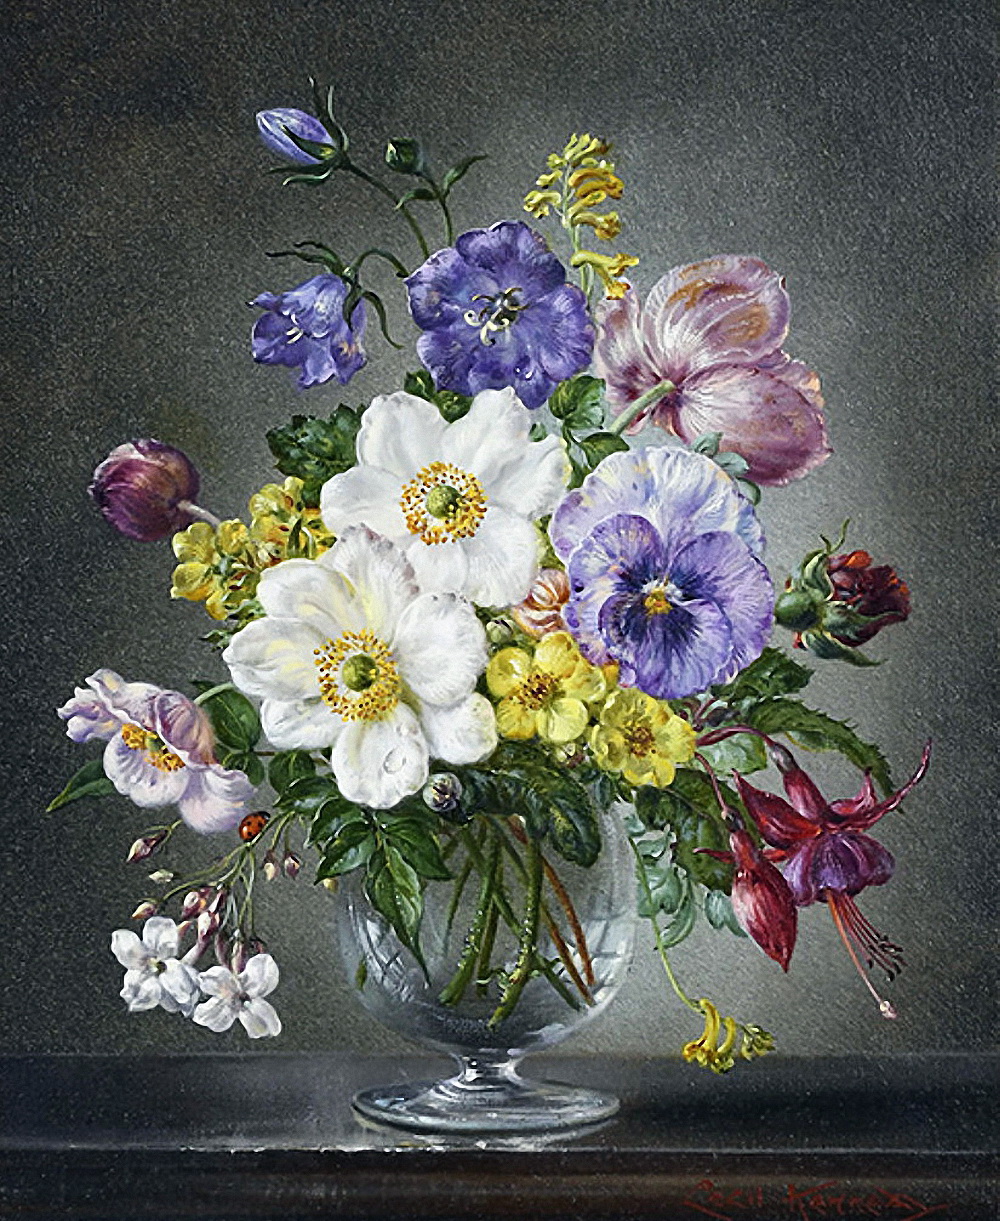 Spring Flowers in a Glass Vase 2 yapfiles.ru